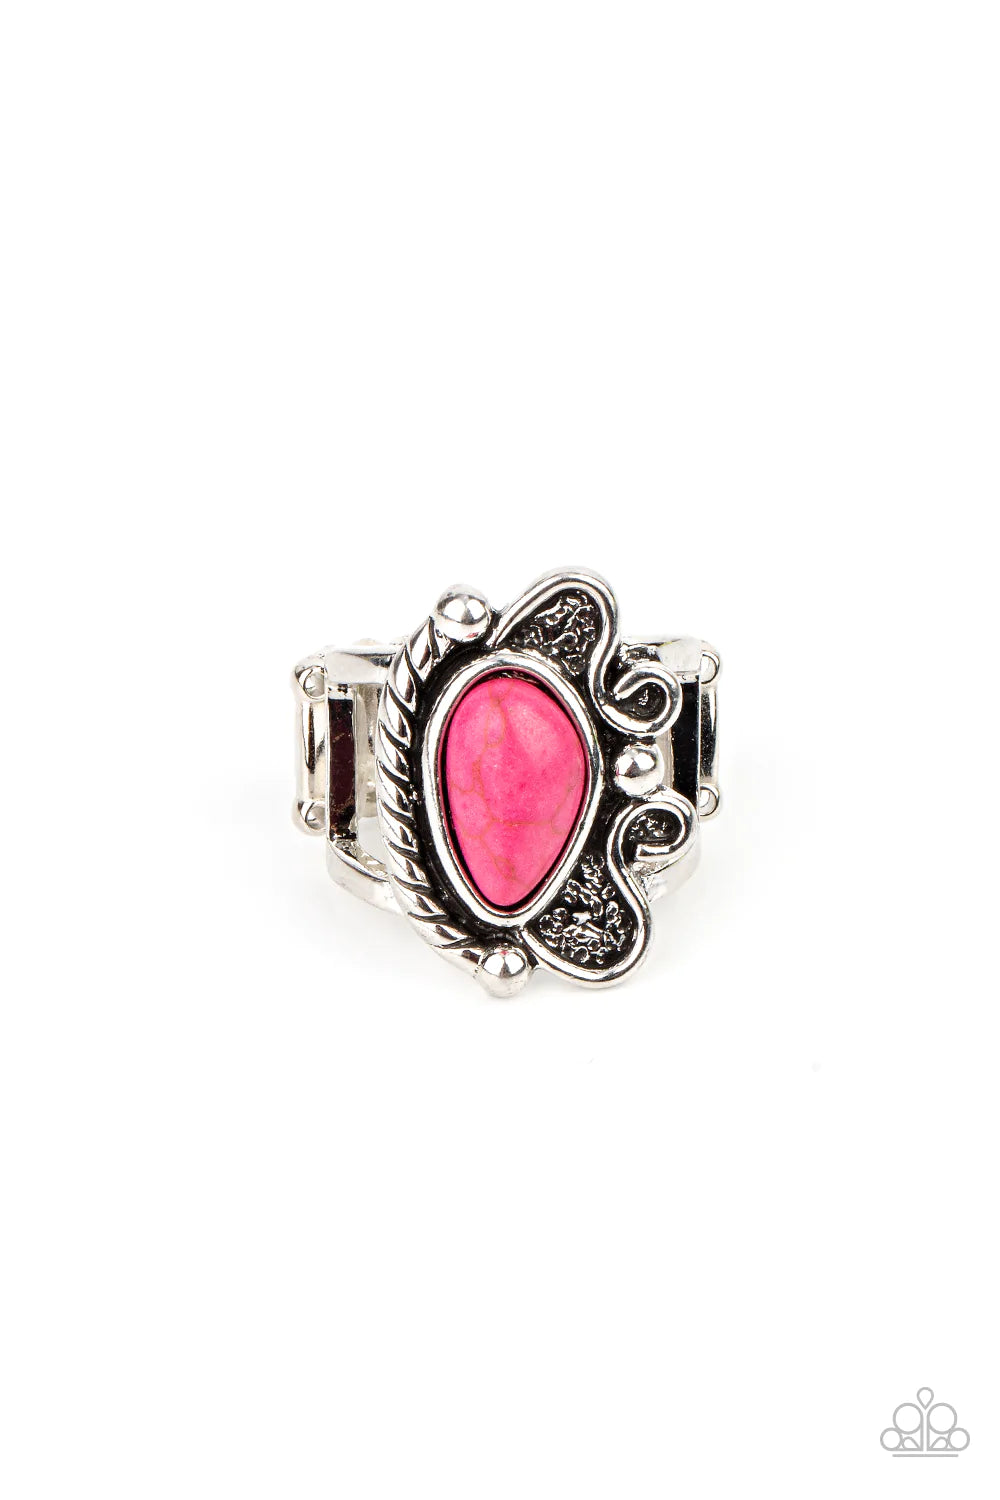 Paparazzi Accessories Mesa Meditation - Pink Antiqued silver texture combines with rope and studded accents to create a swirling frame. A pink asymmetrical teardrop stone nestles inside, culminating in an artisan-inspired ensemble atop the finger. Feature